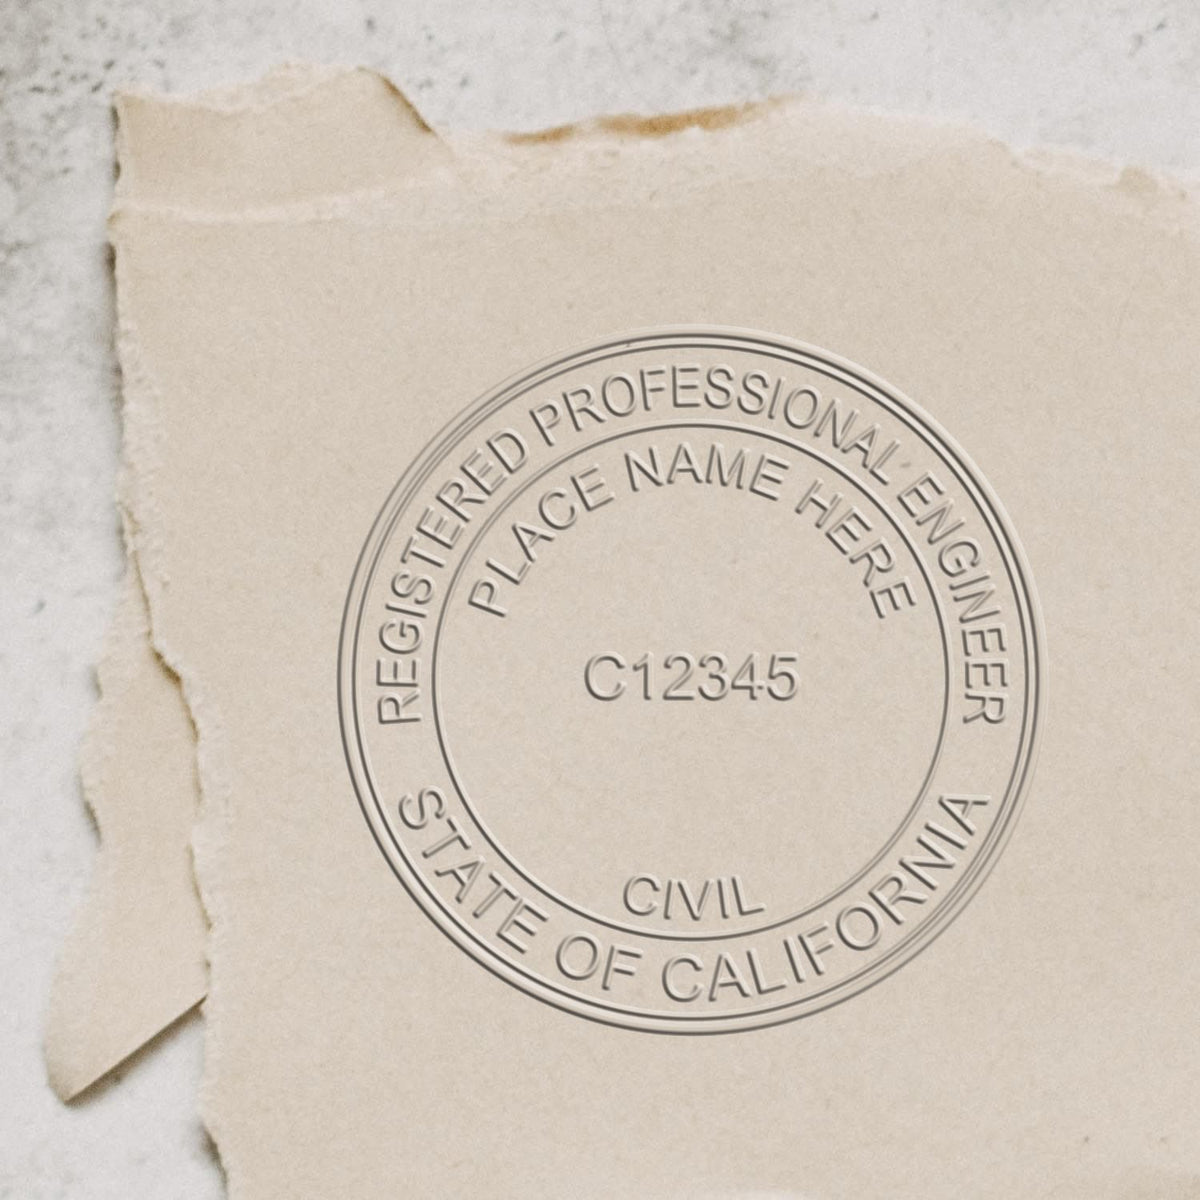 A stamped imprint of the Gift California Engineer Seal in this stylish lifestyle photo, setting the tone for a unique and personalized product.